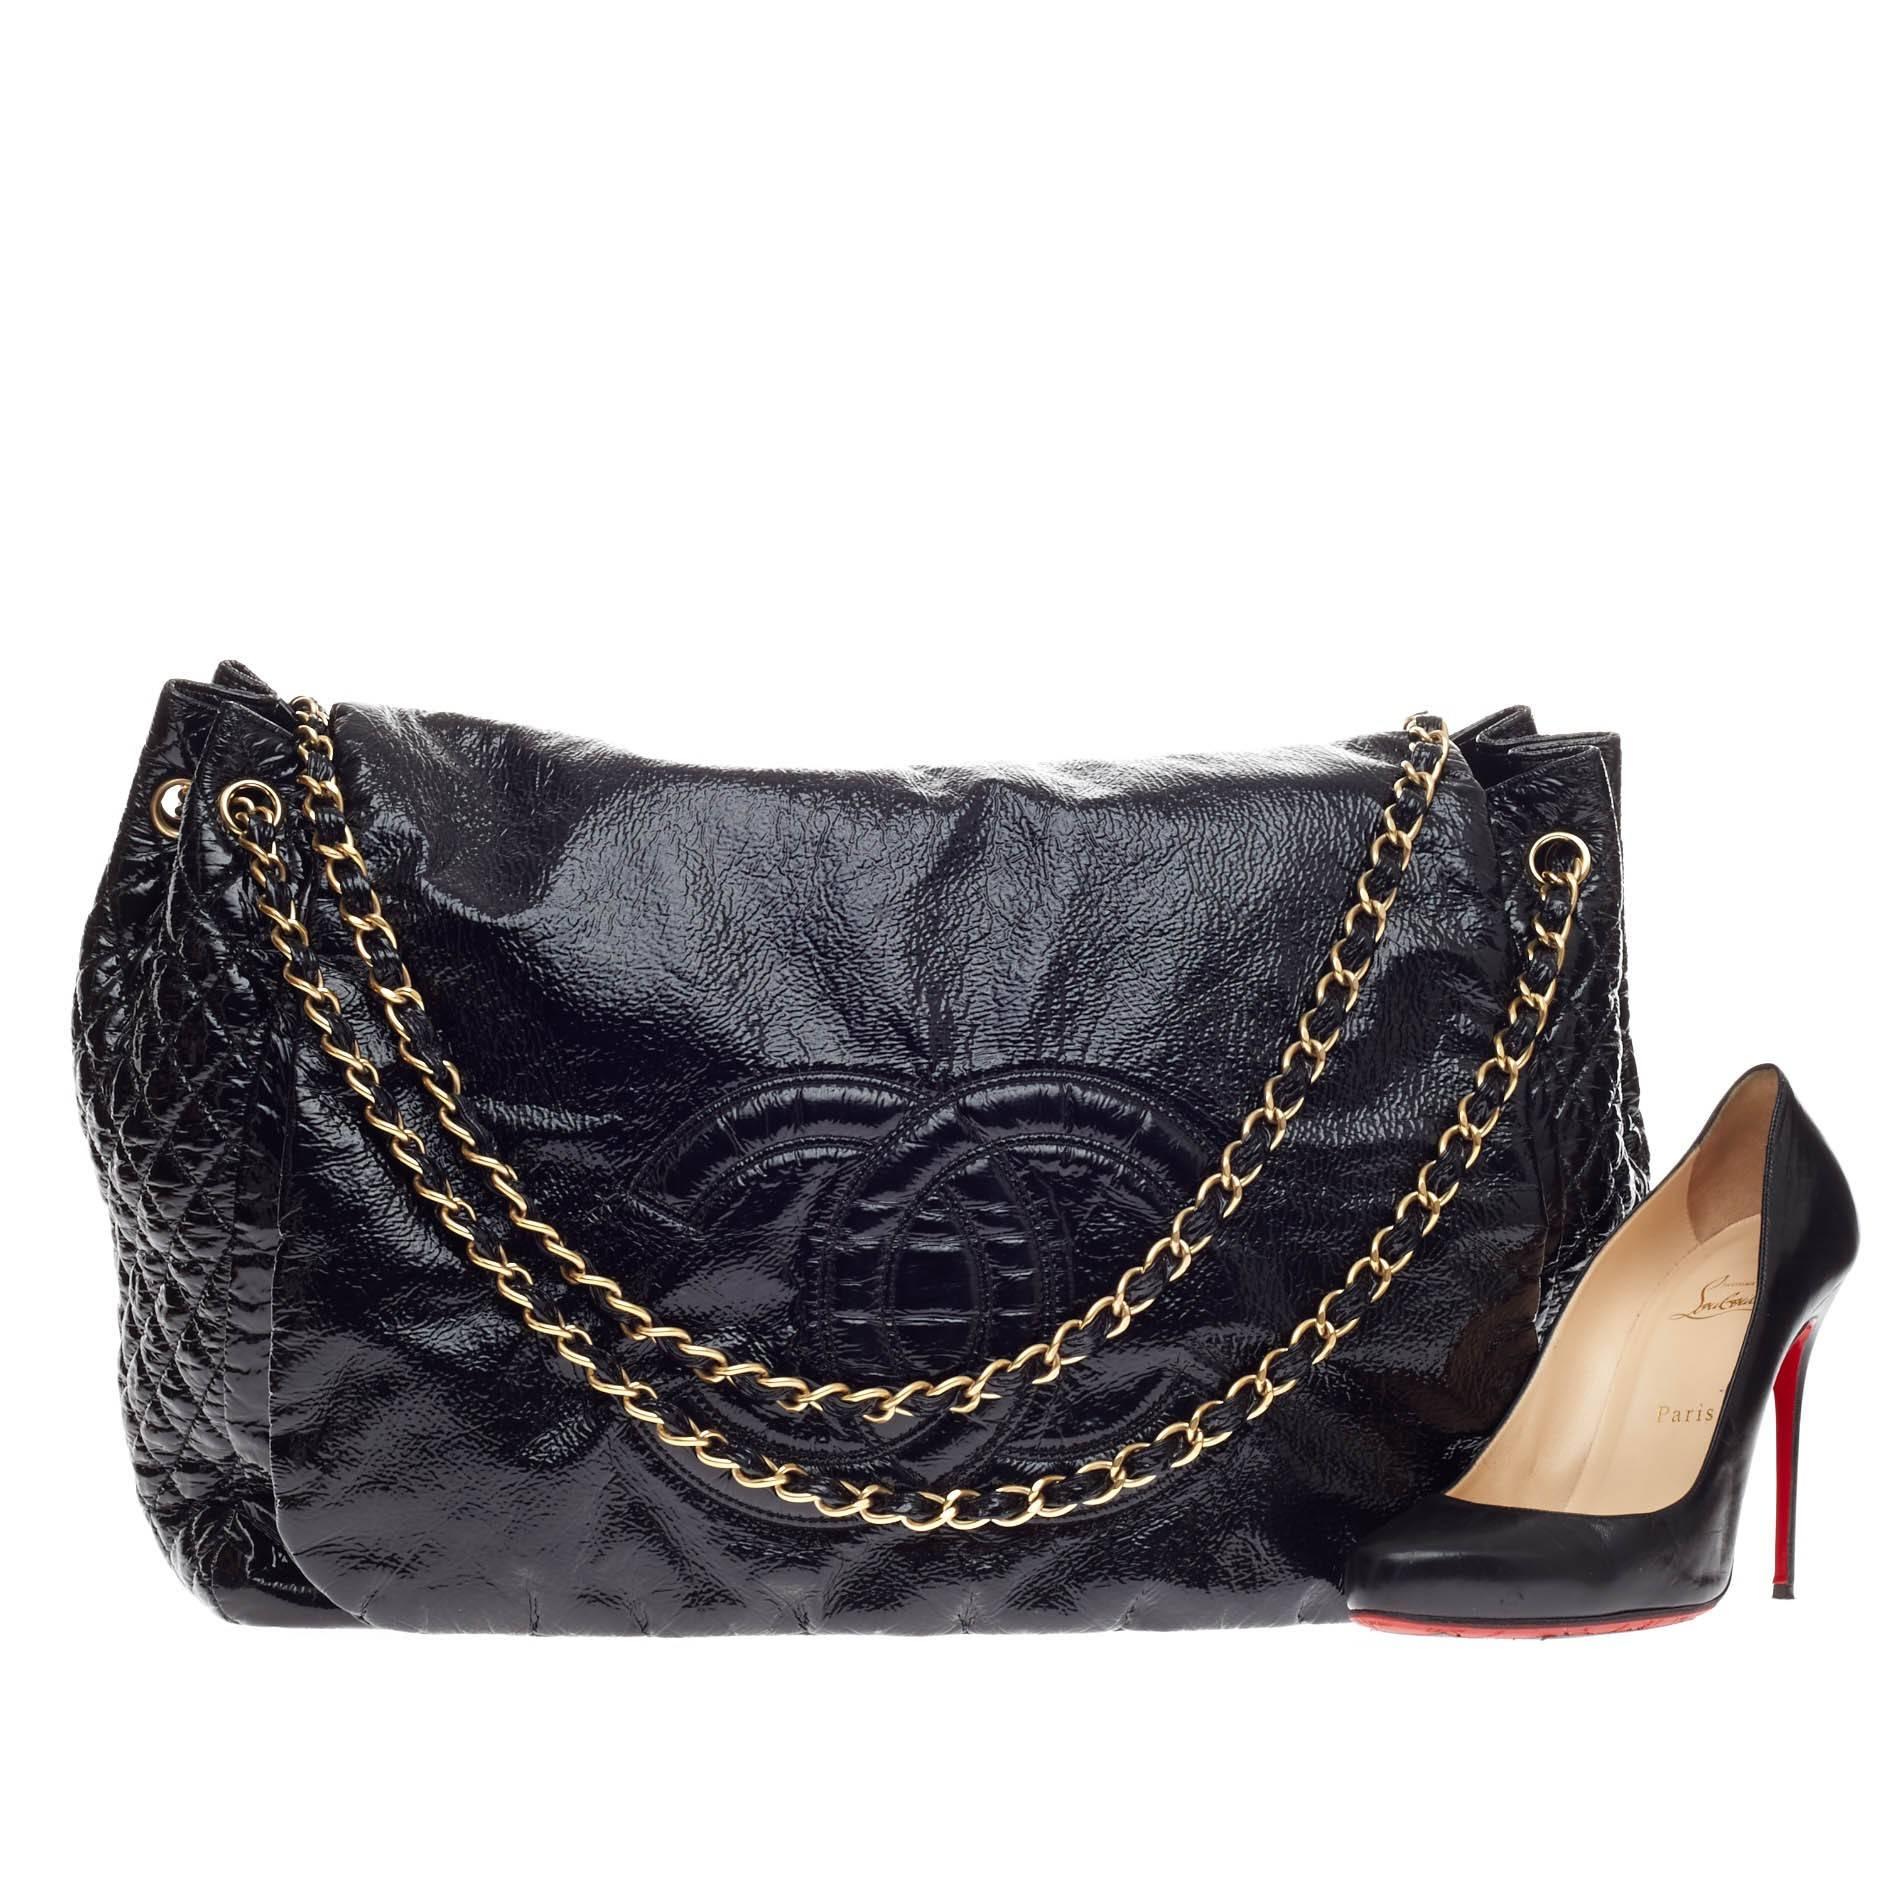 This authentic Chanel Rock and Chain Flap Bag Patent Large boasts a large stature perfect for Chanel lovers. Crafted in distressed black patent vinyl fabric, this rommy tote features signature woven-in leather chain straps, large CC stitched design